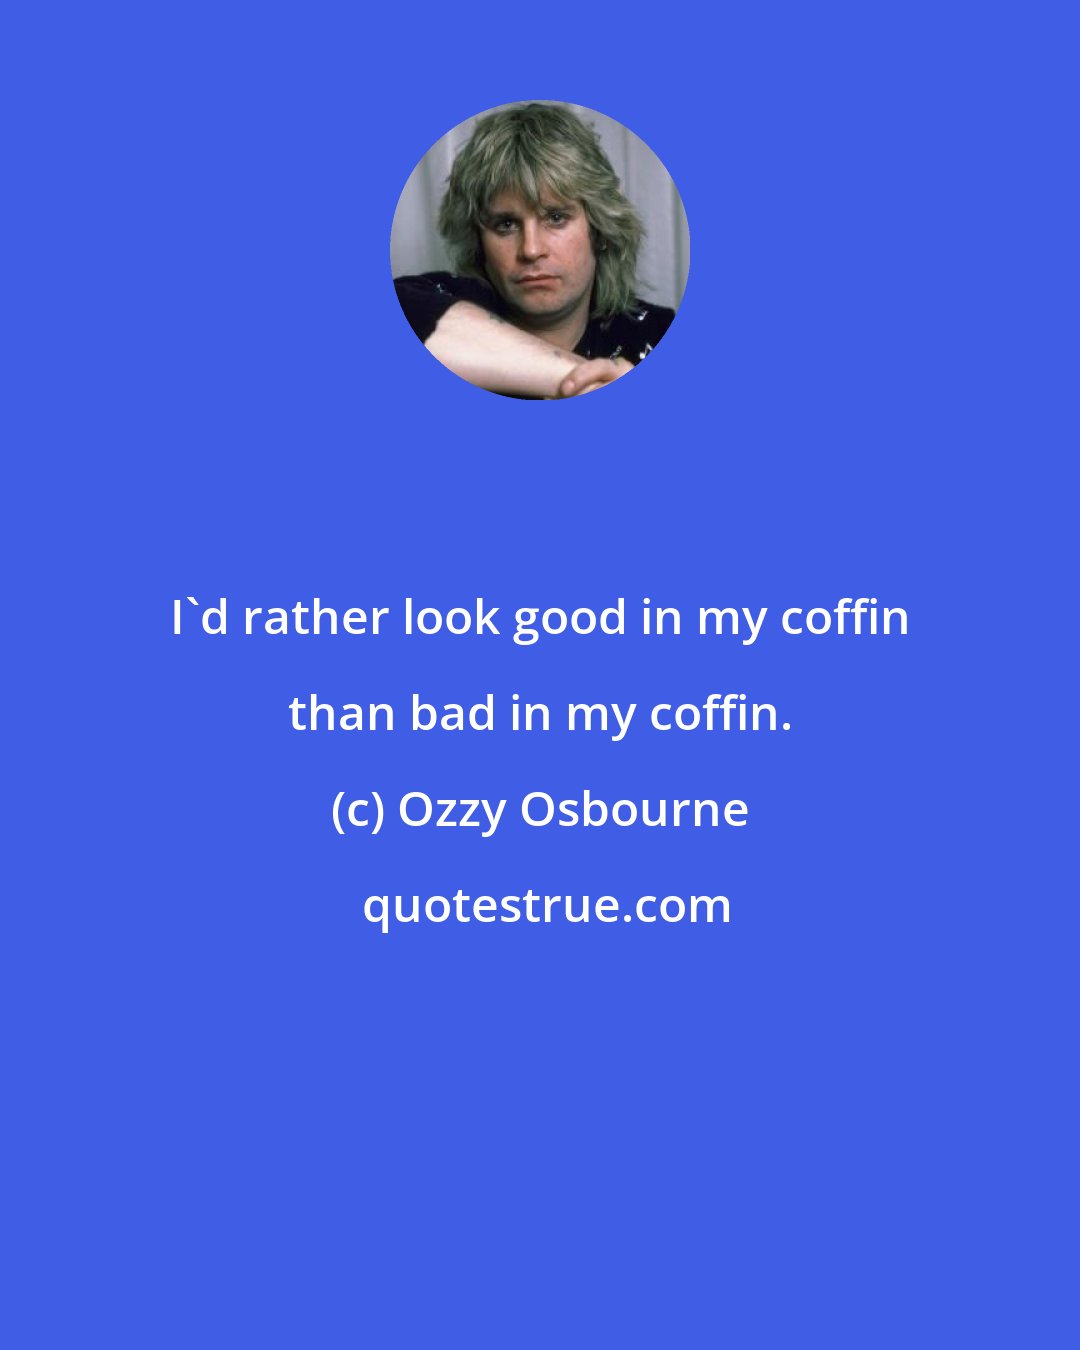 Ozzy Osbourne: I'd rather look good in my coffin than bad in my coffin.